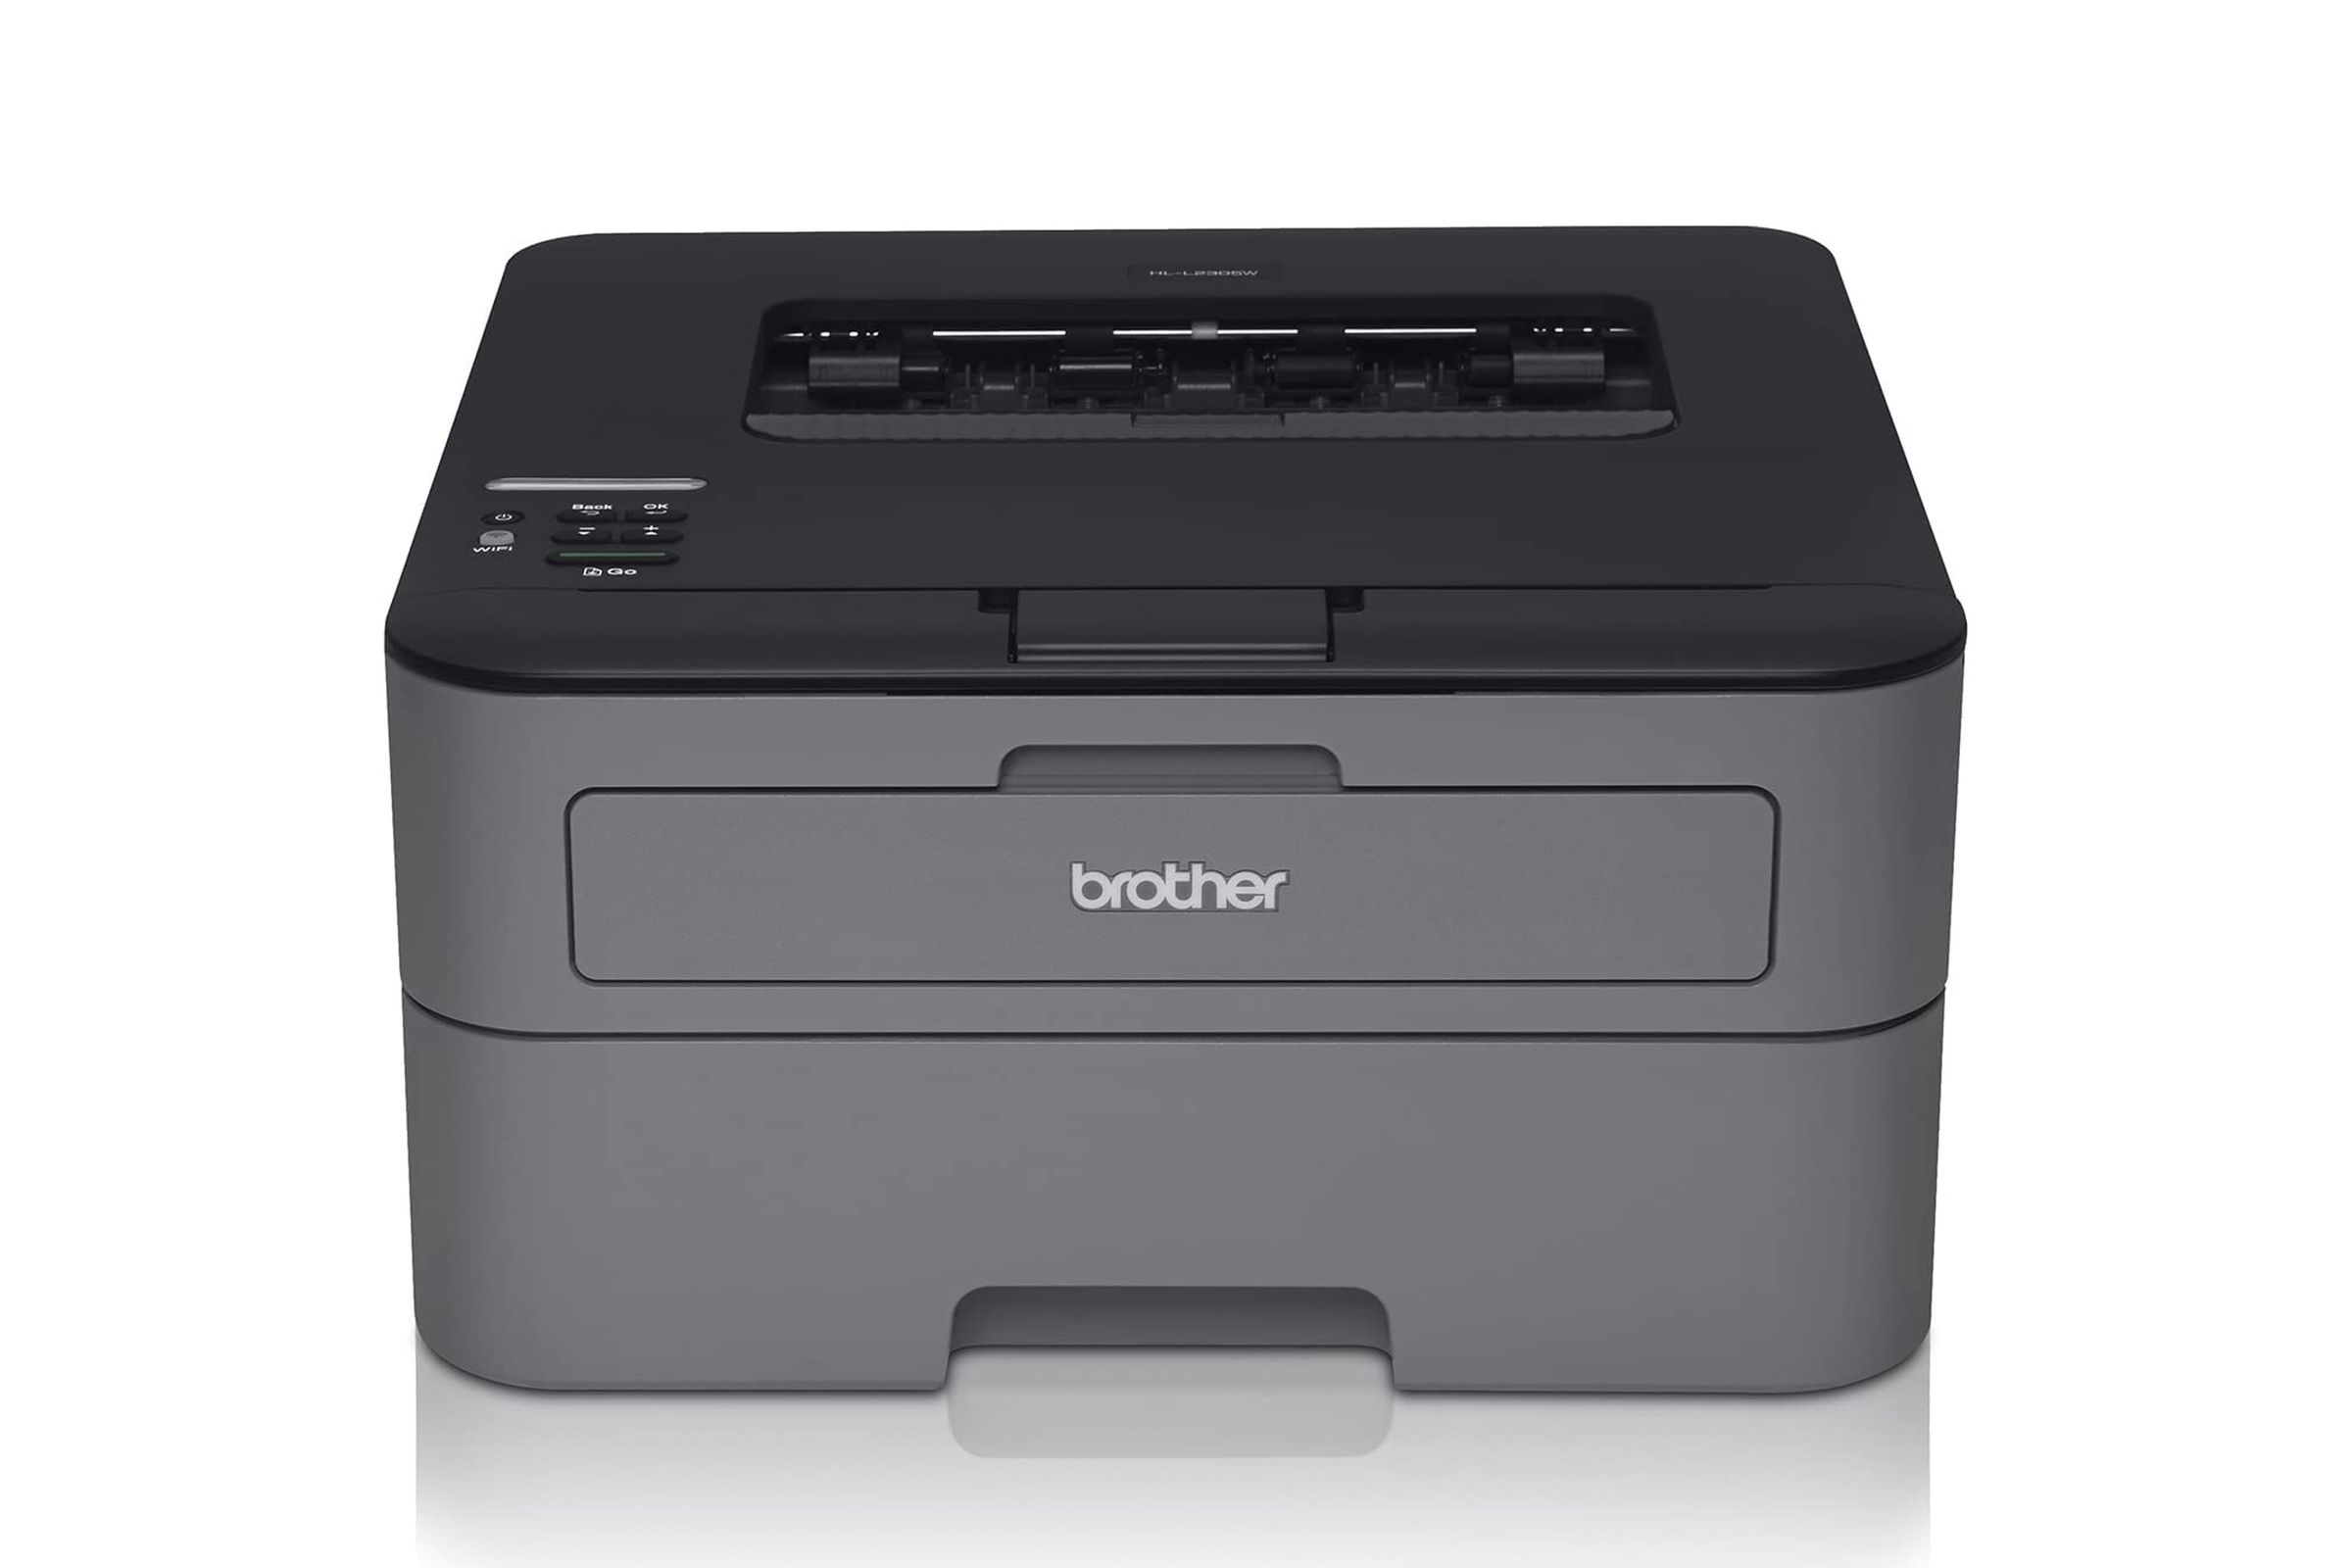 A Brother HL-L2305W laser printer on a white background